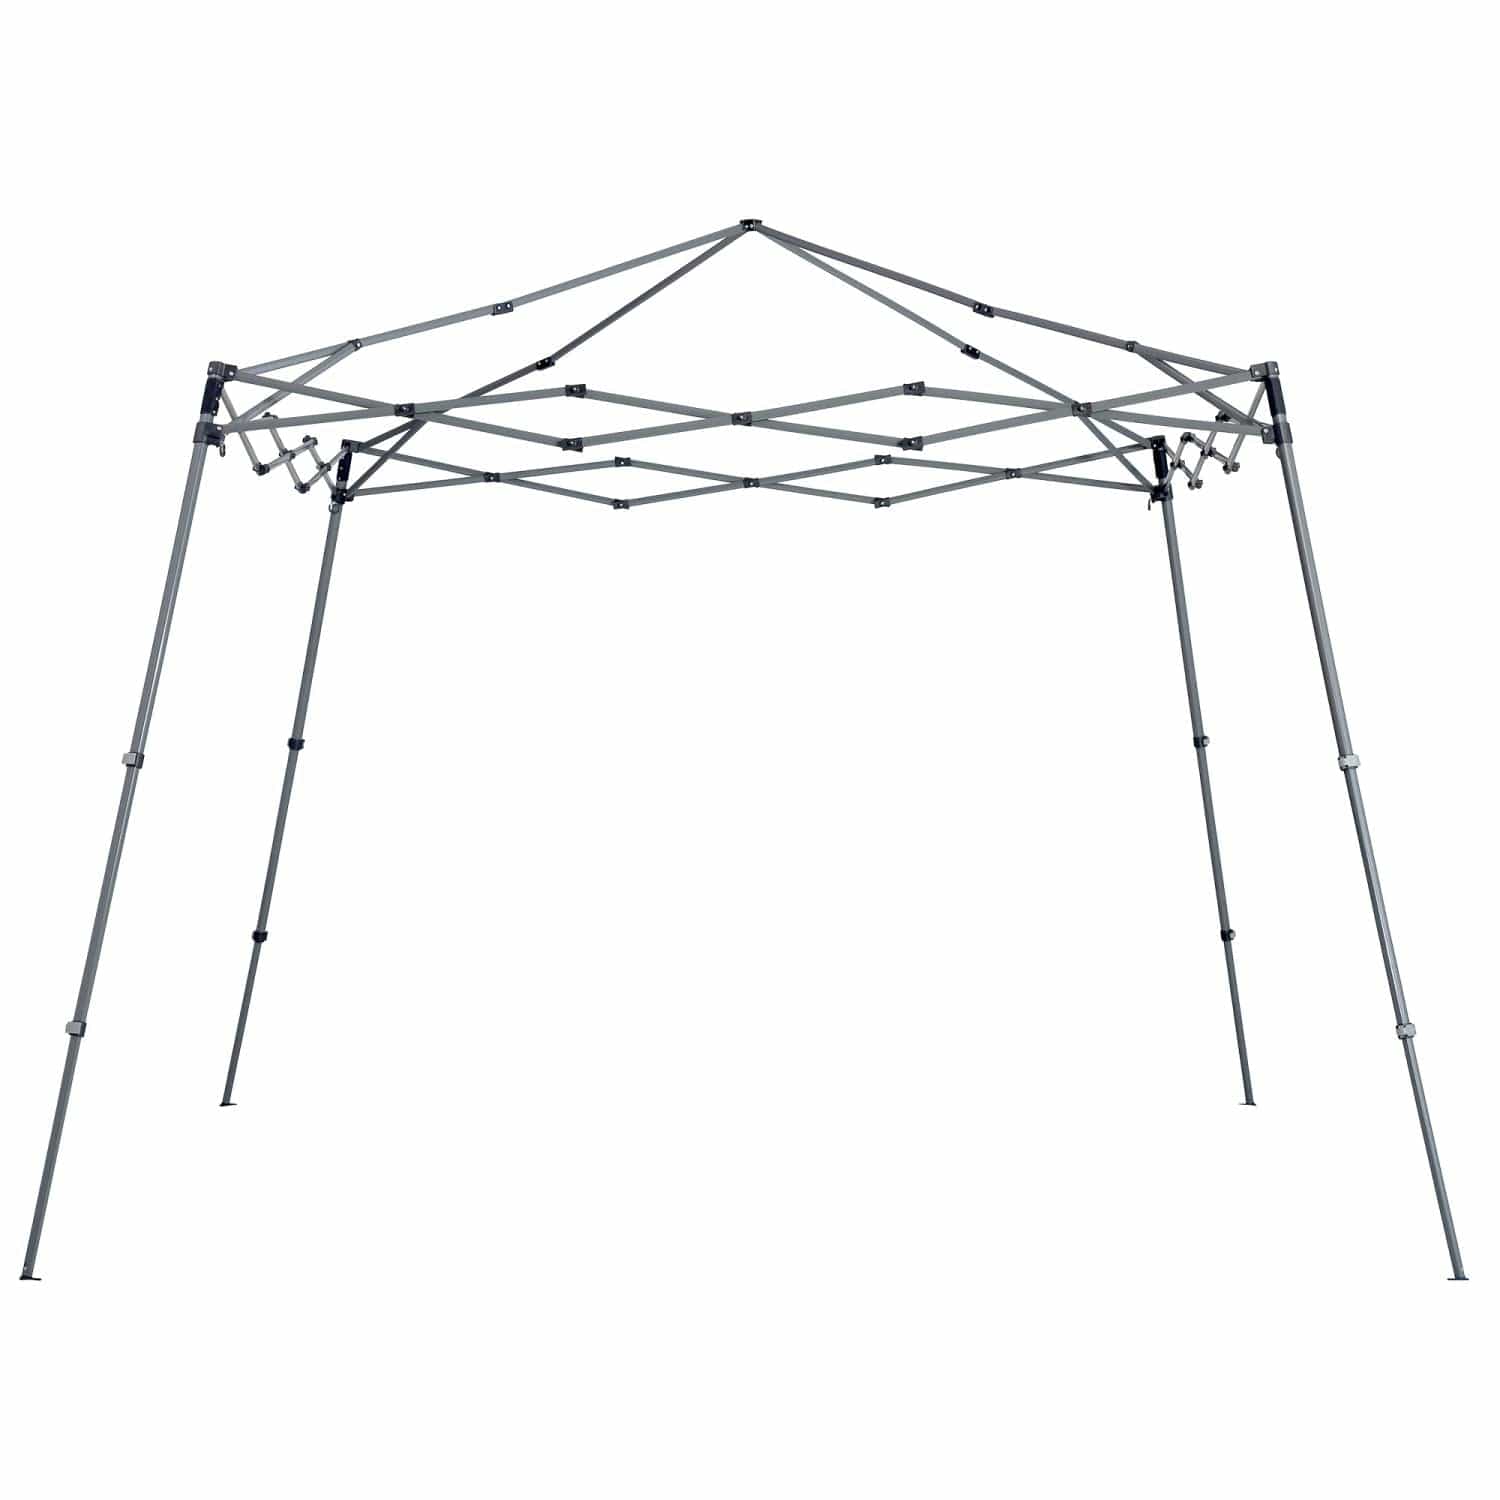 Quik Shade Pop Up Canopies Quik Shade | Solo Steel 64 10' x 10' Slant Leg Canopy - Turquoise 167534DS